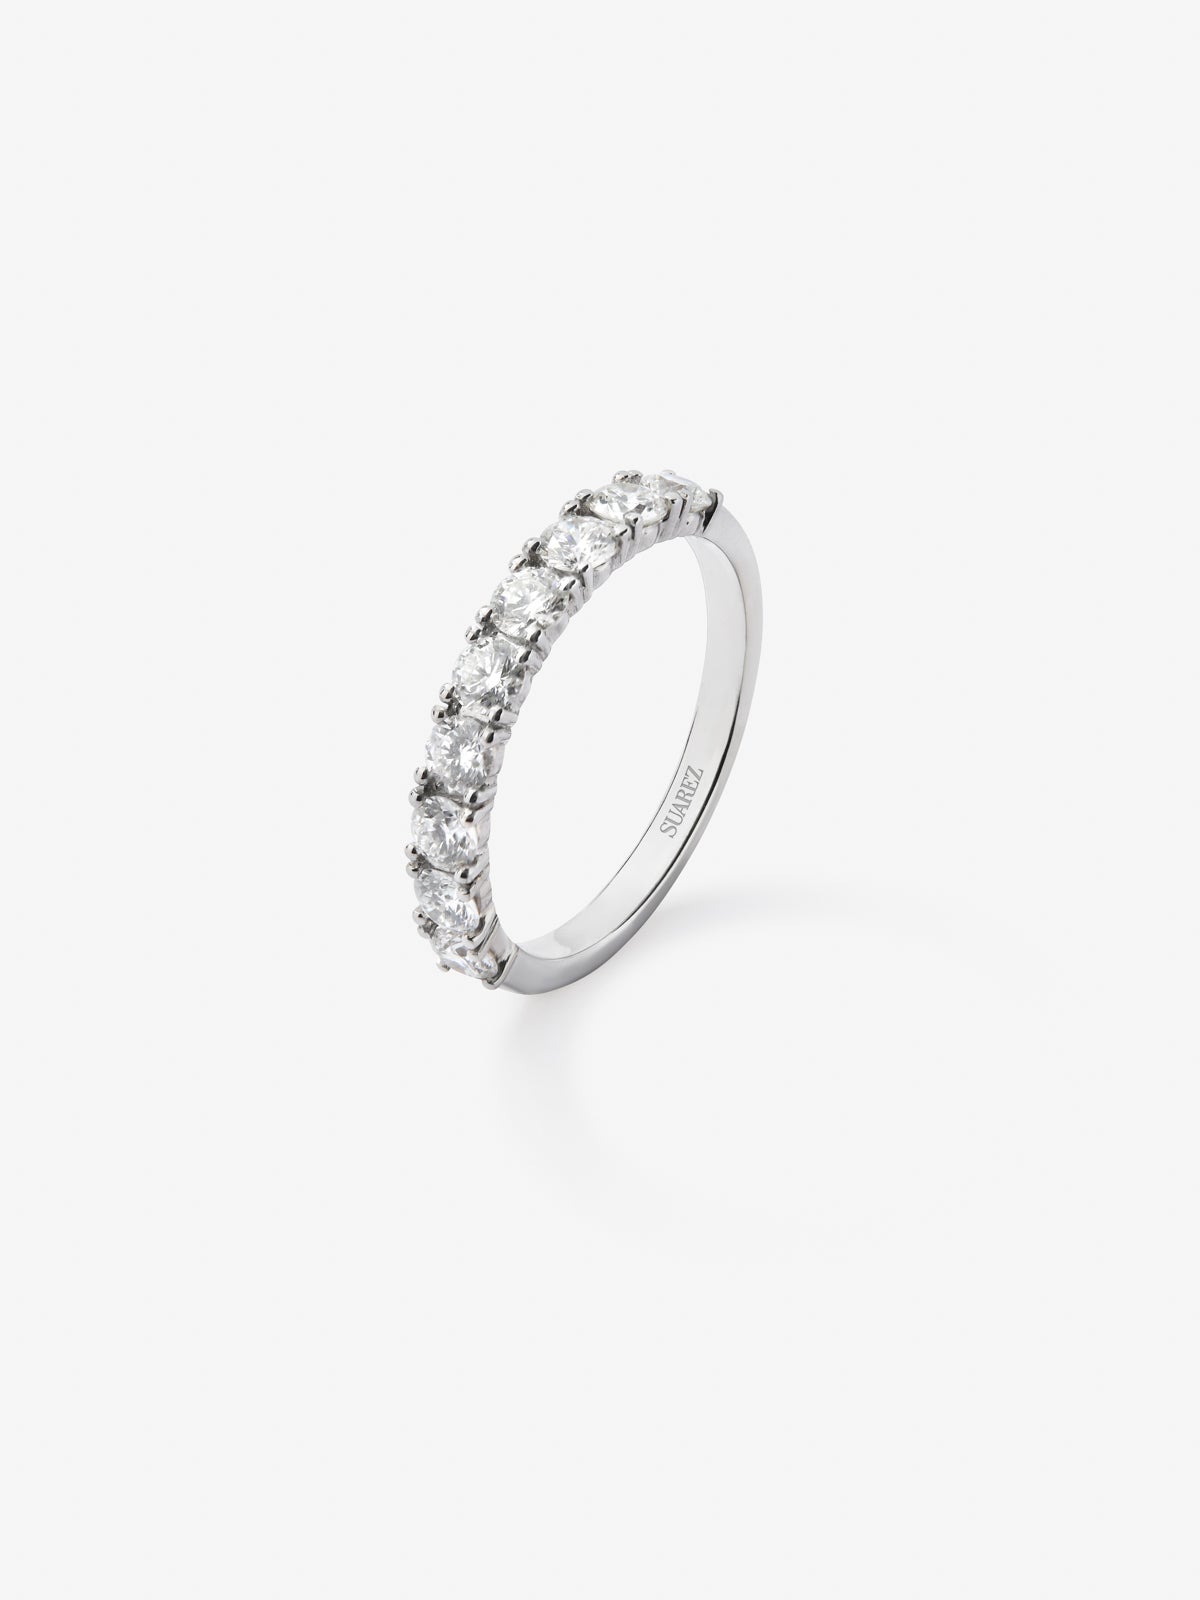 Half ring in 18K white gold with 9 brilliant-cut diamonds with a total of 0.91 cts